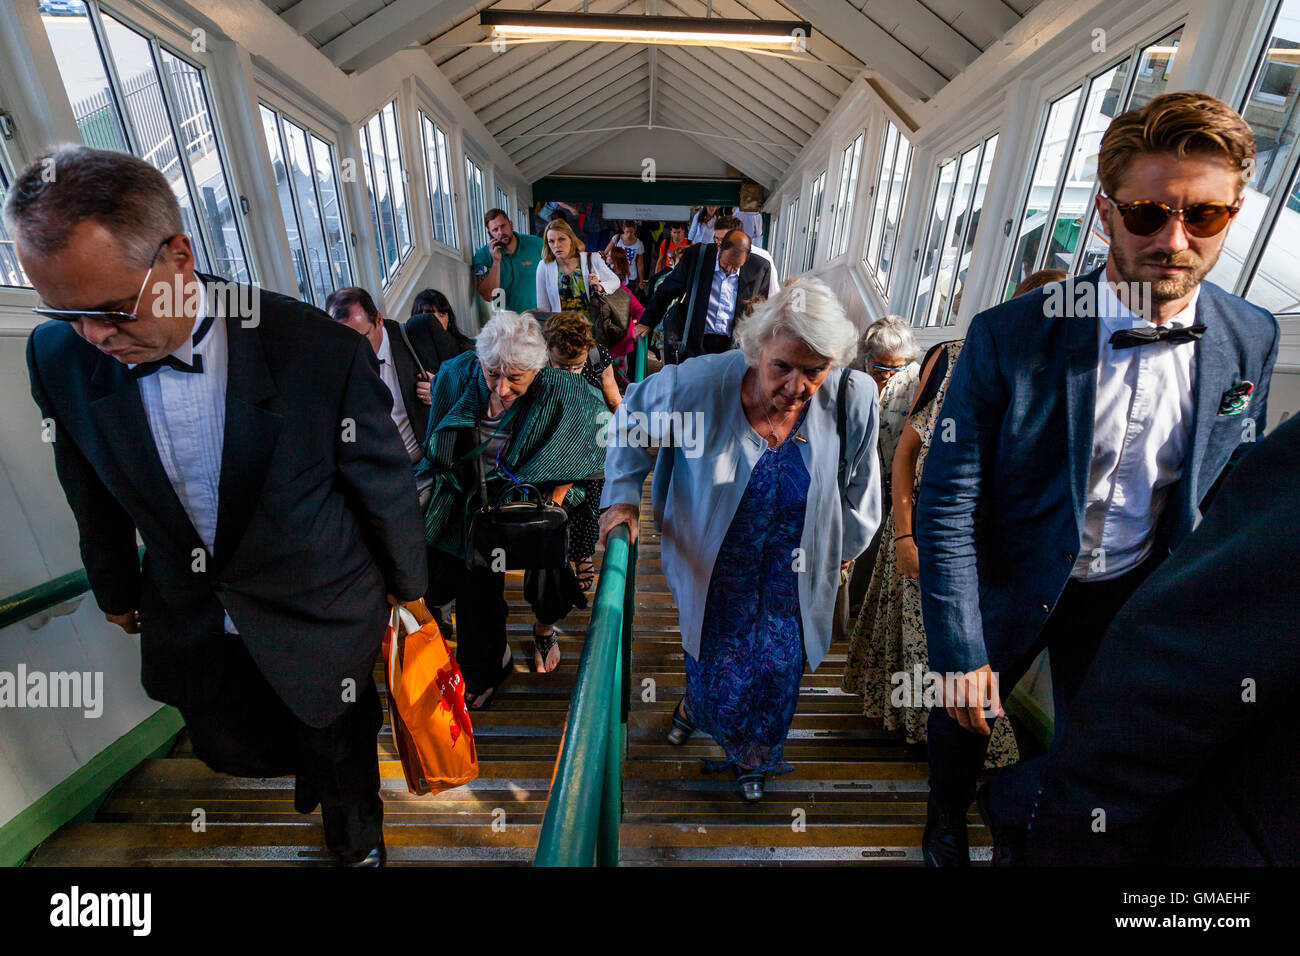 Opera Fans Arrive At Lewes Station En Route To Glyndebourne Opera House, Lewes, Sussex, UK Stock Photo